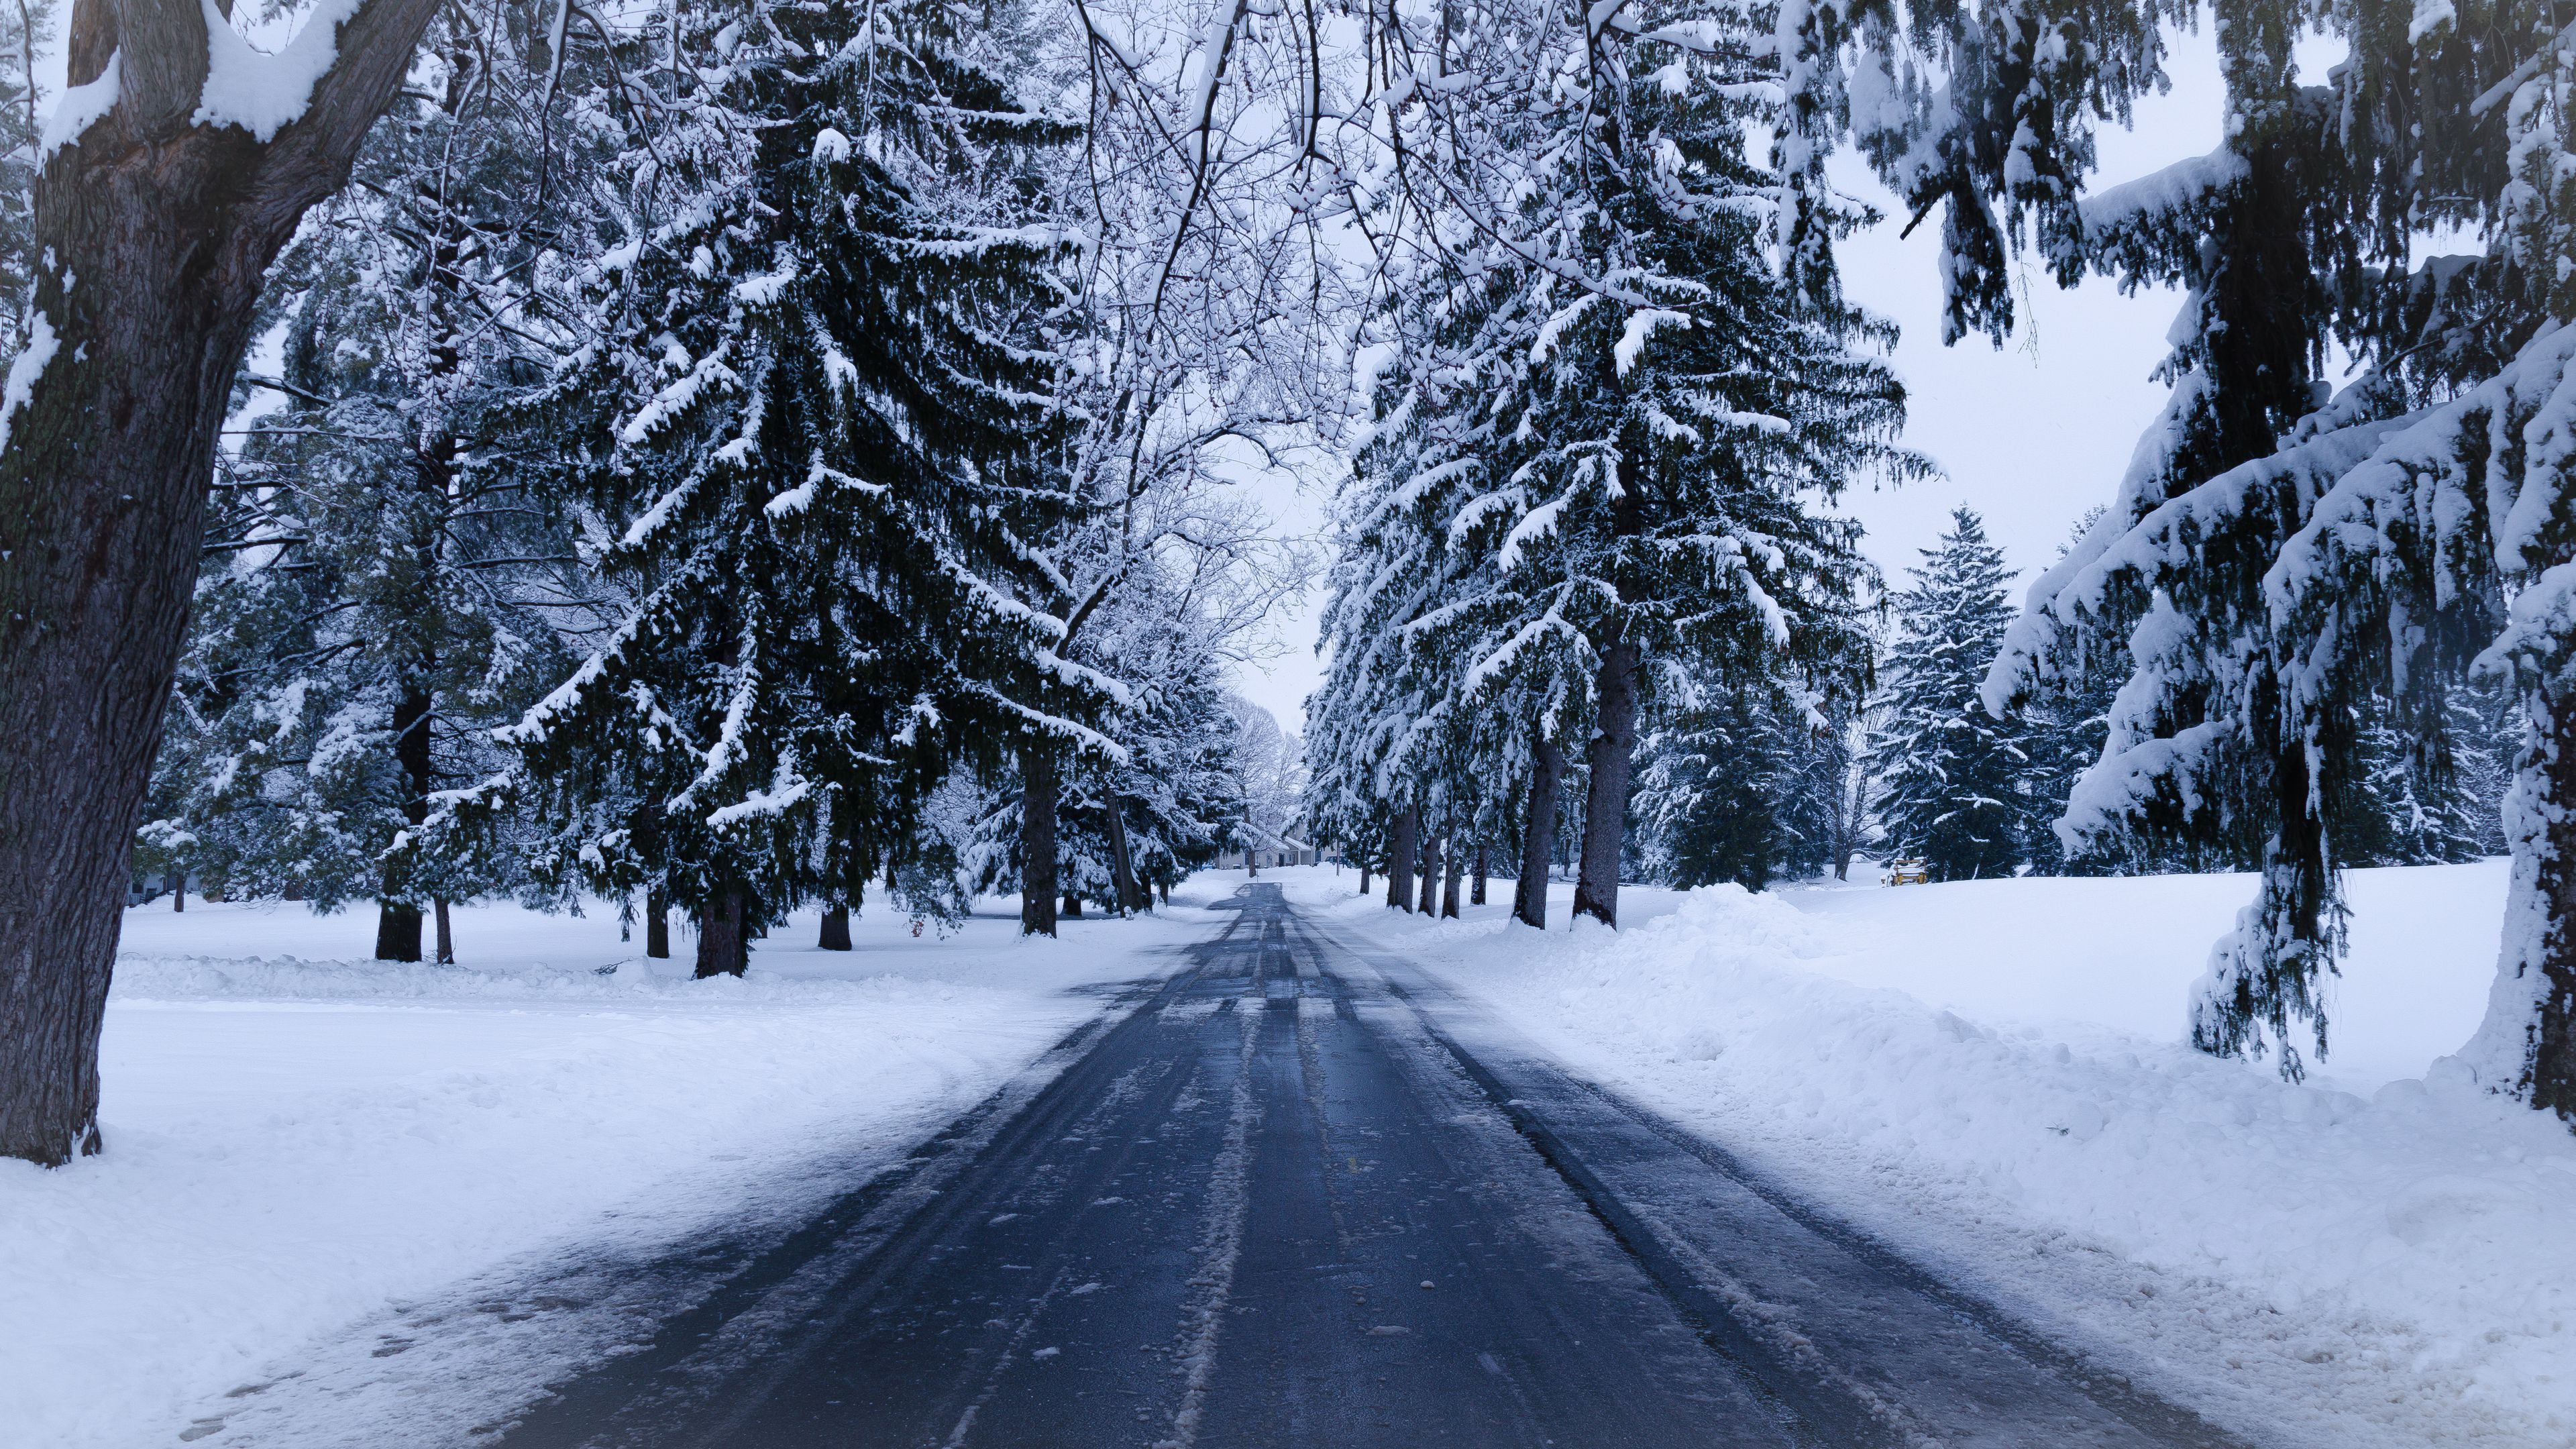 Download wallpapers 3840x2160 winter, road, snow, trees, winter landscape 4k uhd 16:9 hd backgrounds